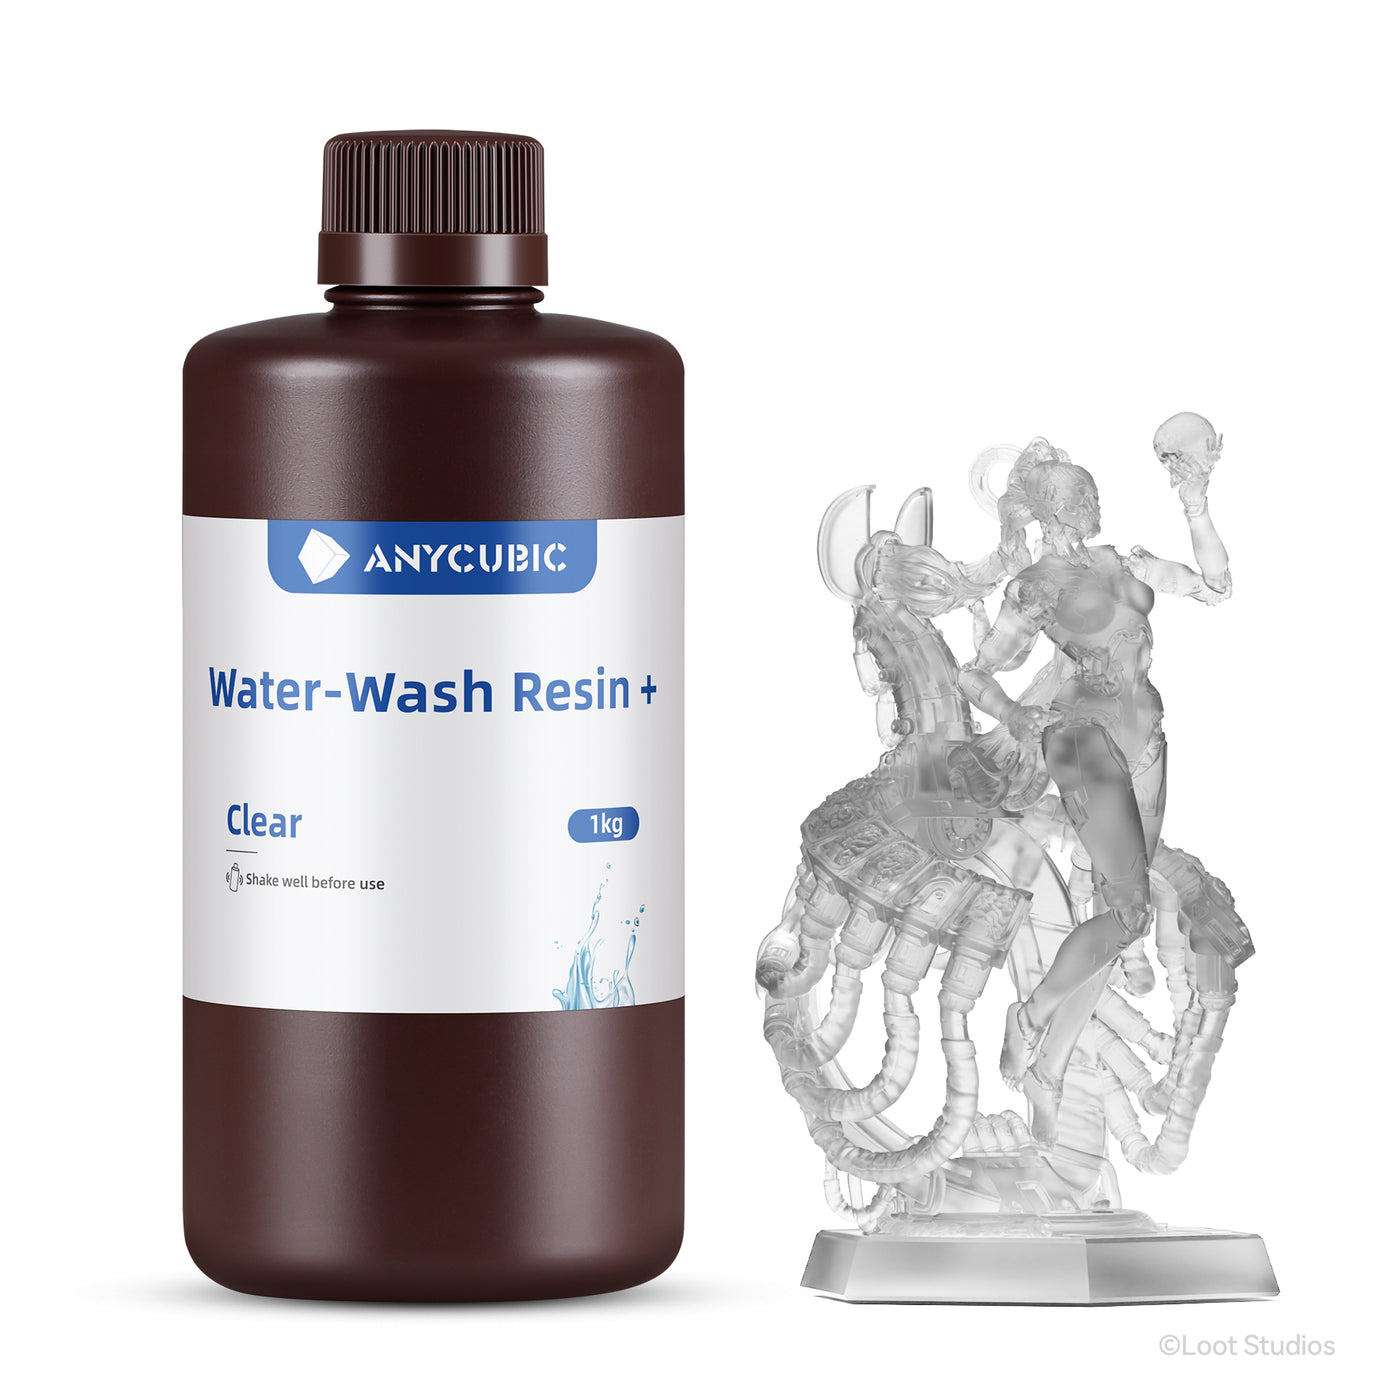 Water-Wash Resin+ - Get 3 for the Price of 2